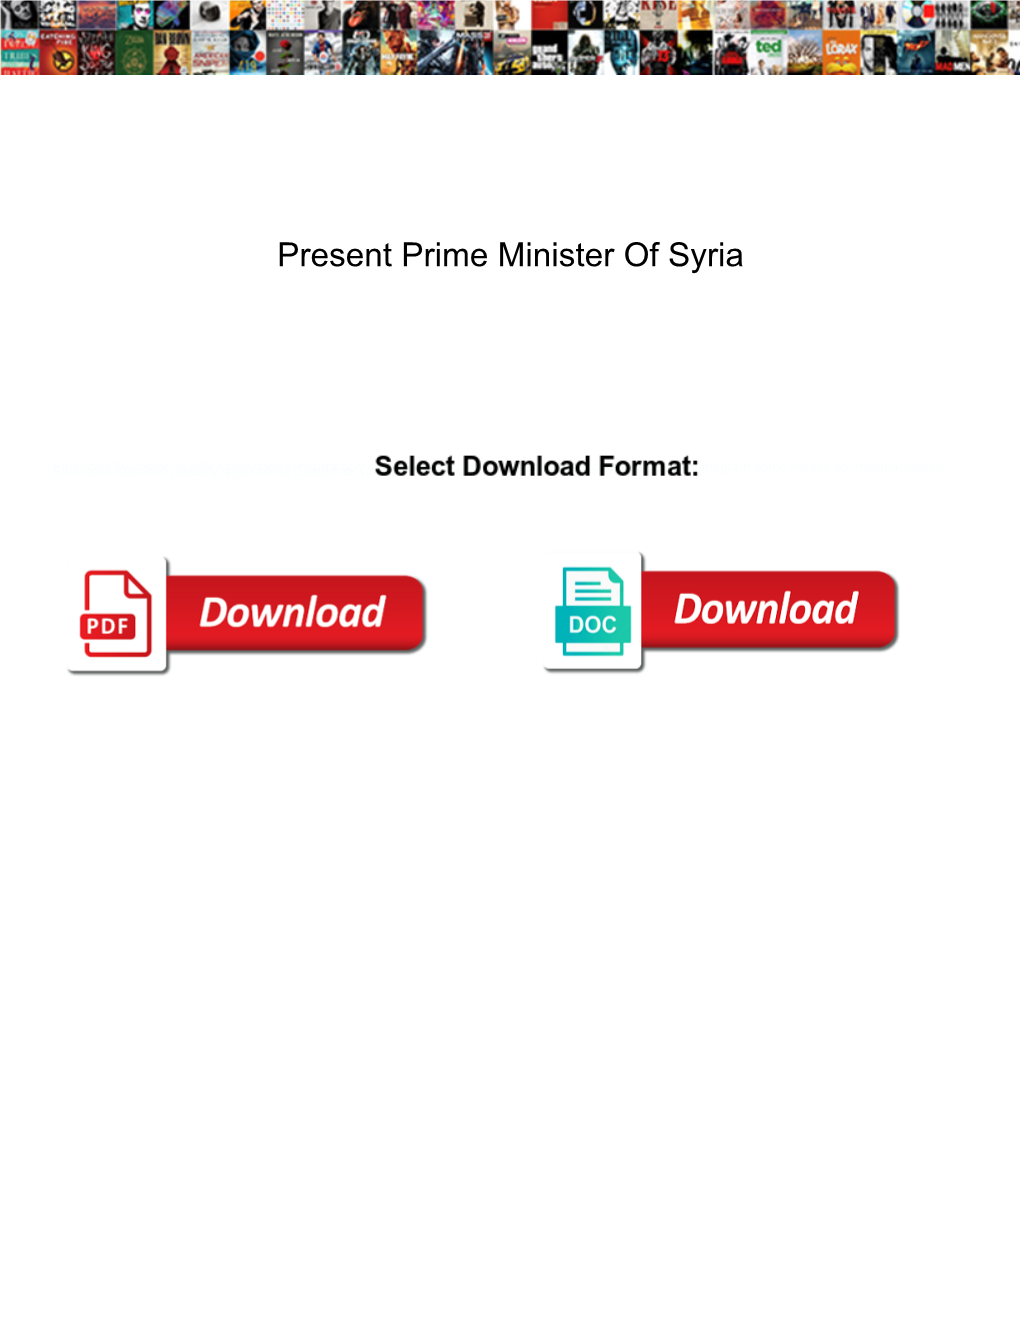 Present Prime Minister of Syria